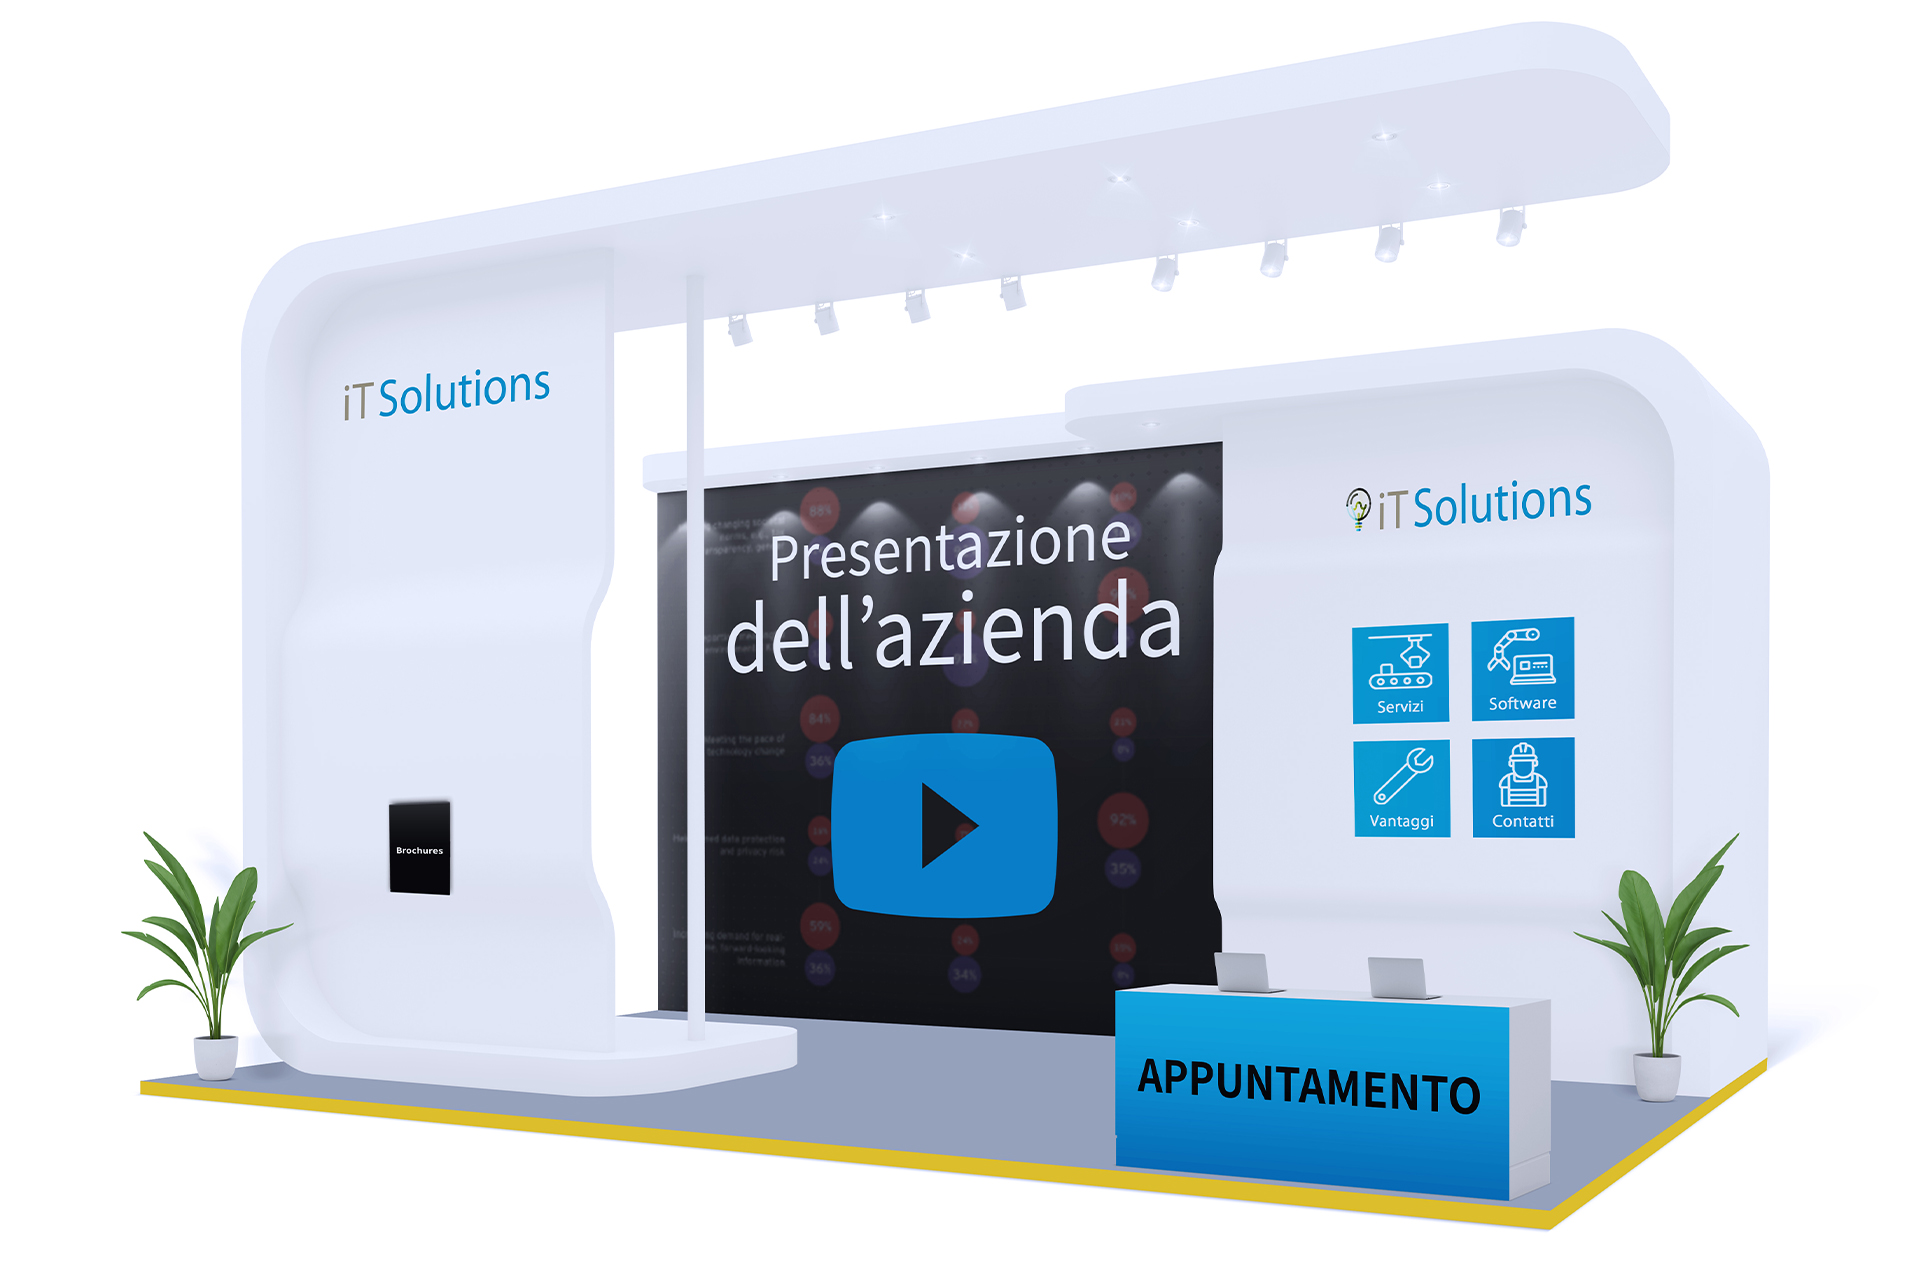 27 – IT Solutions – Stand